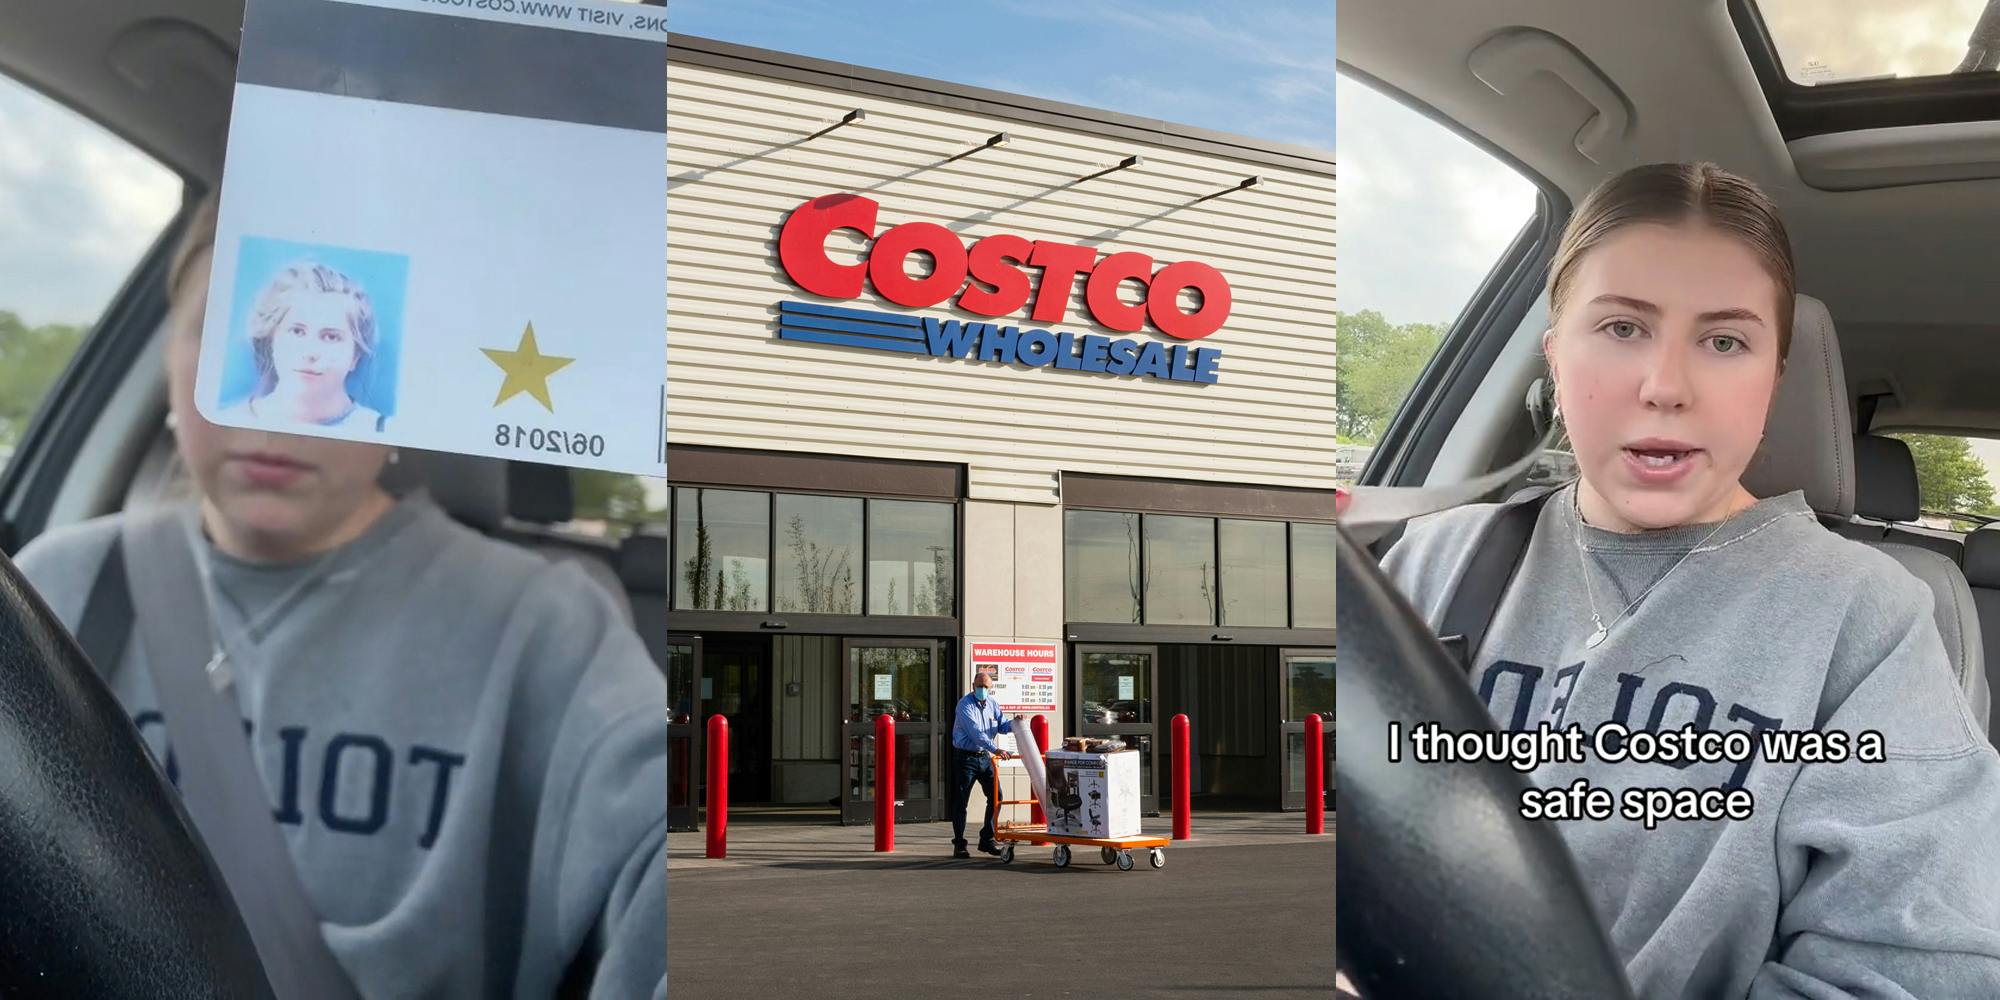 Costco customer holding card photo in car (l) Costco building with sign (c) Costco customer speaking in car with capti9on "I thought Costco was a safe space" (r)